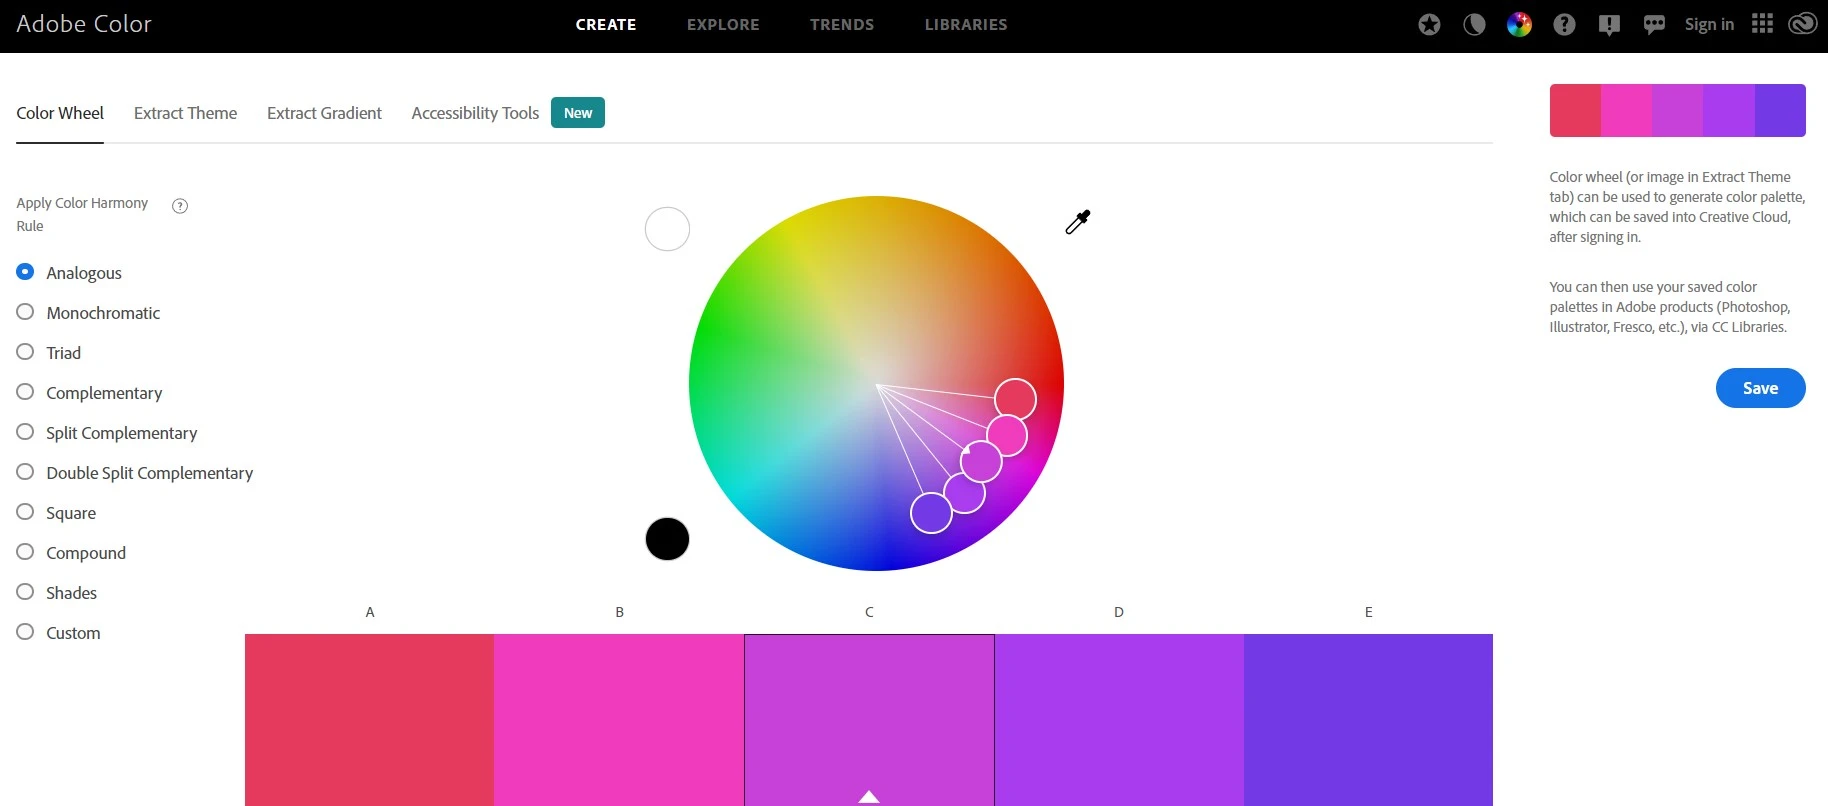 Adobe Color one of the best color palette sites